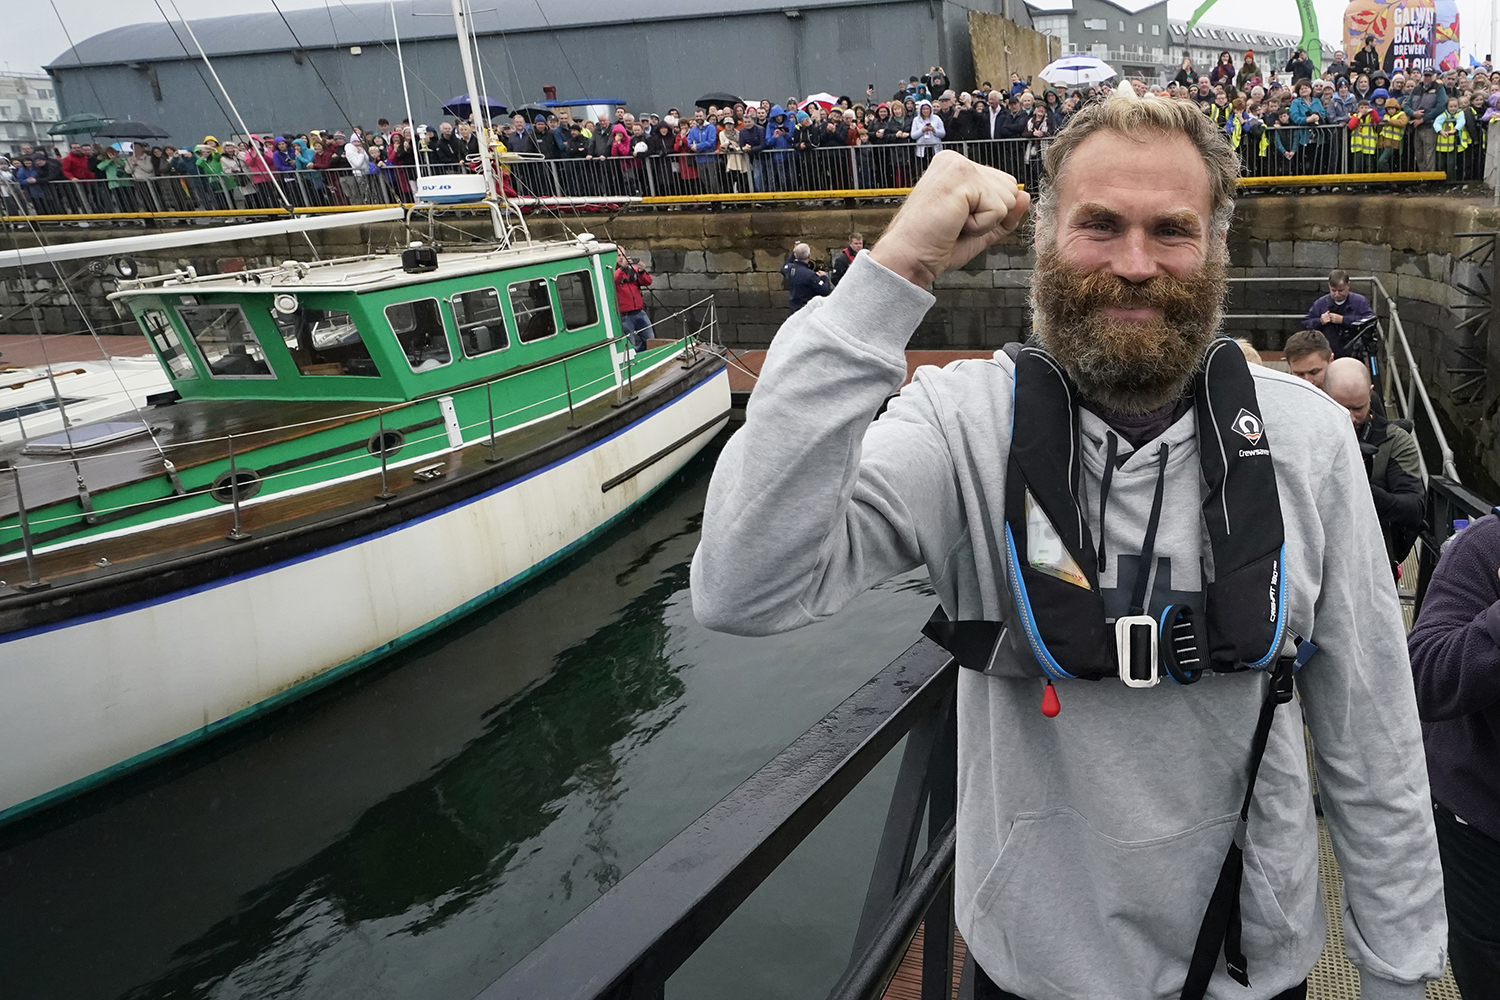 Galway, United Kingdom: Former professional rugby player Damian Browne arrives in Galway after becoming the first person to row from New York to Galway at sea.